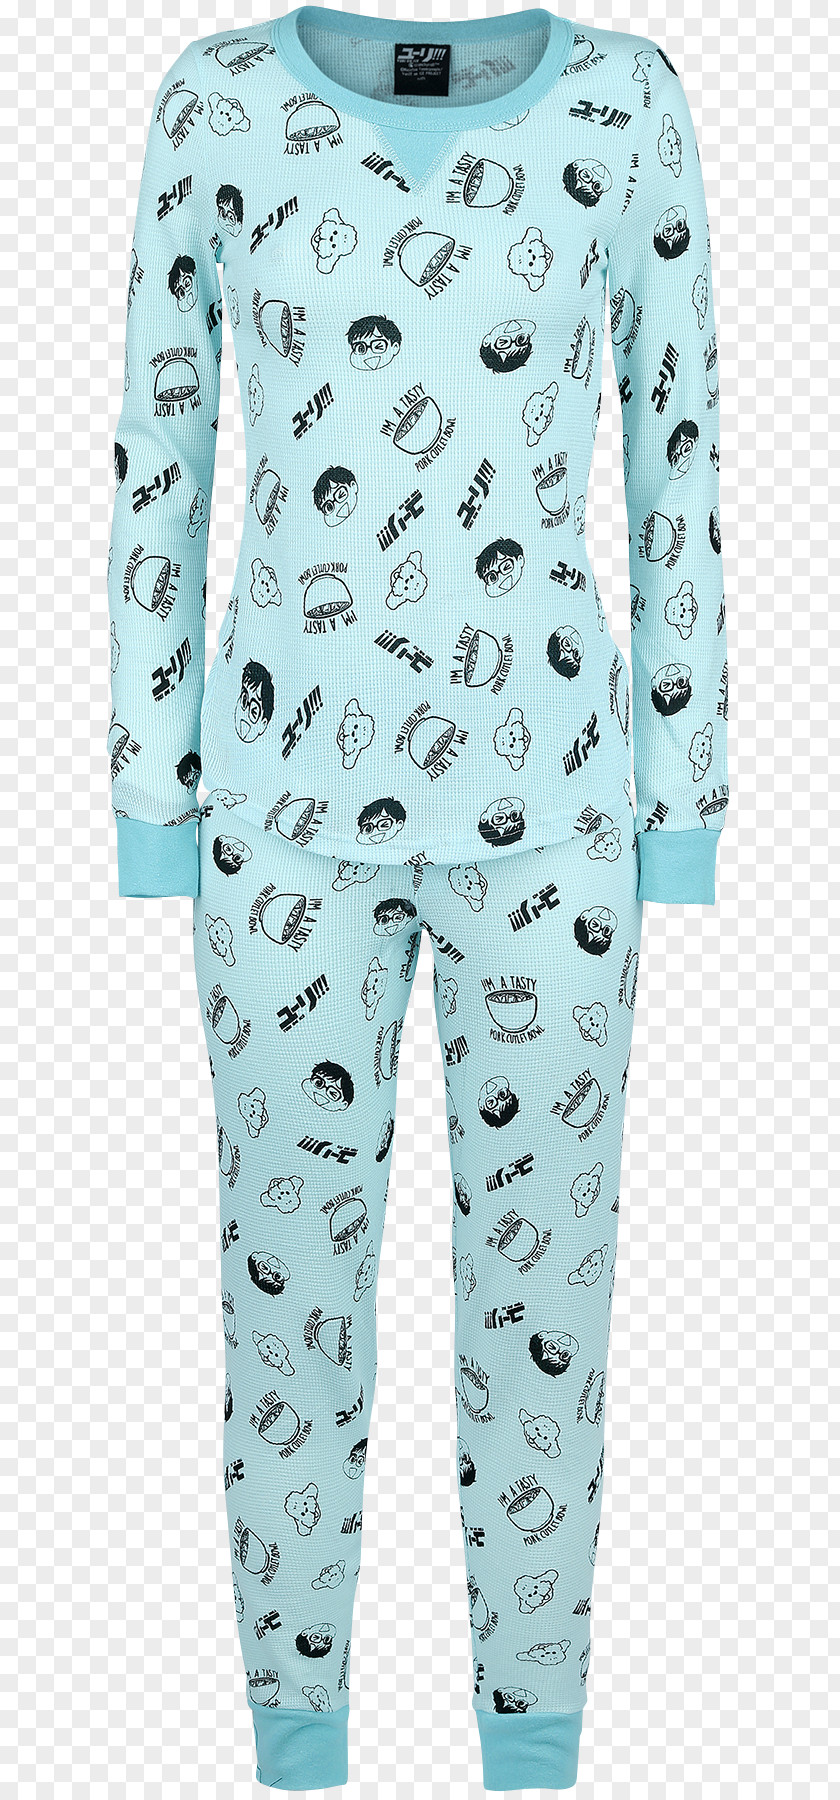 Pajamas Sleeve Wetsuit Neck Product PNG